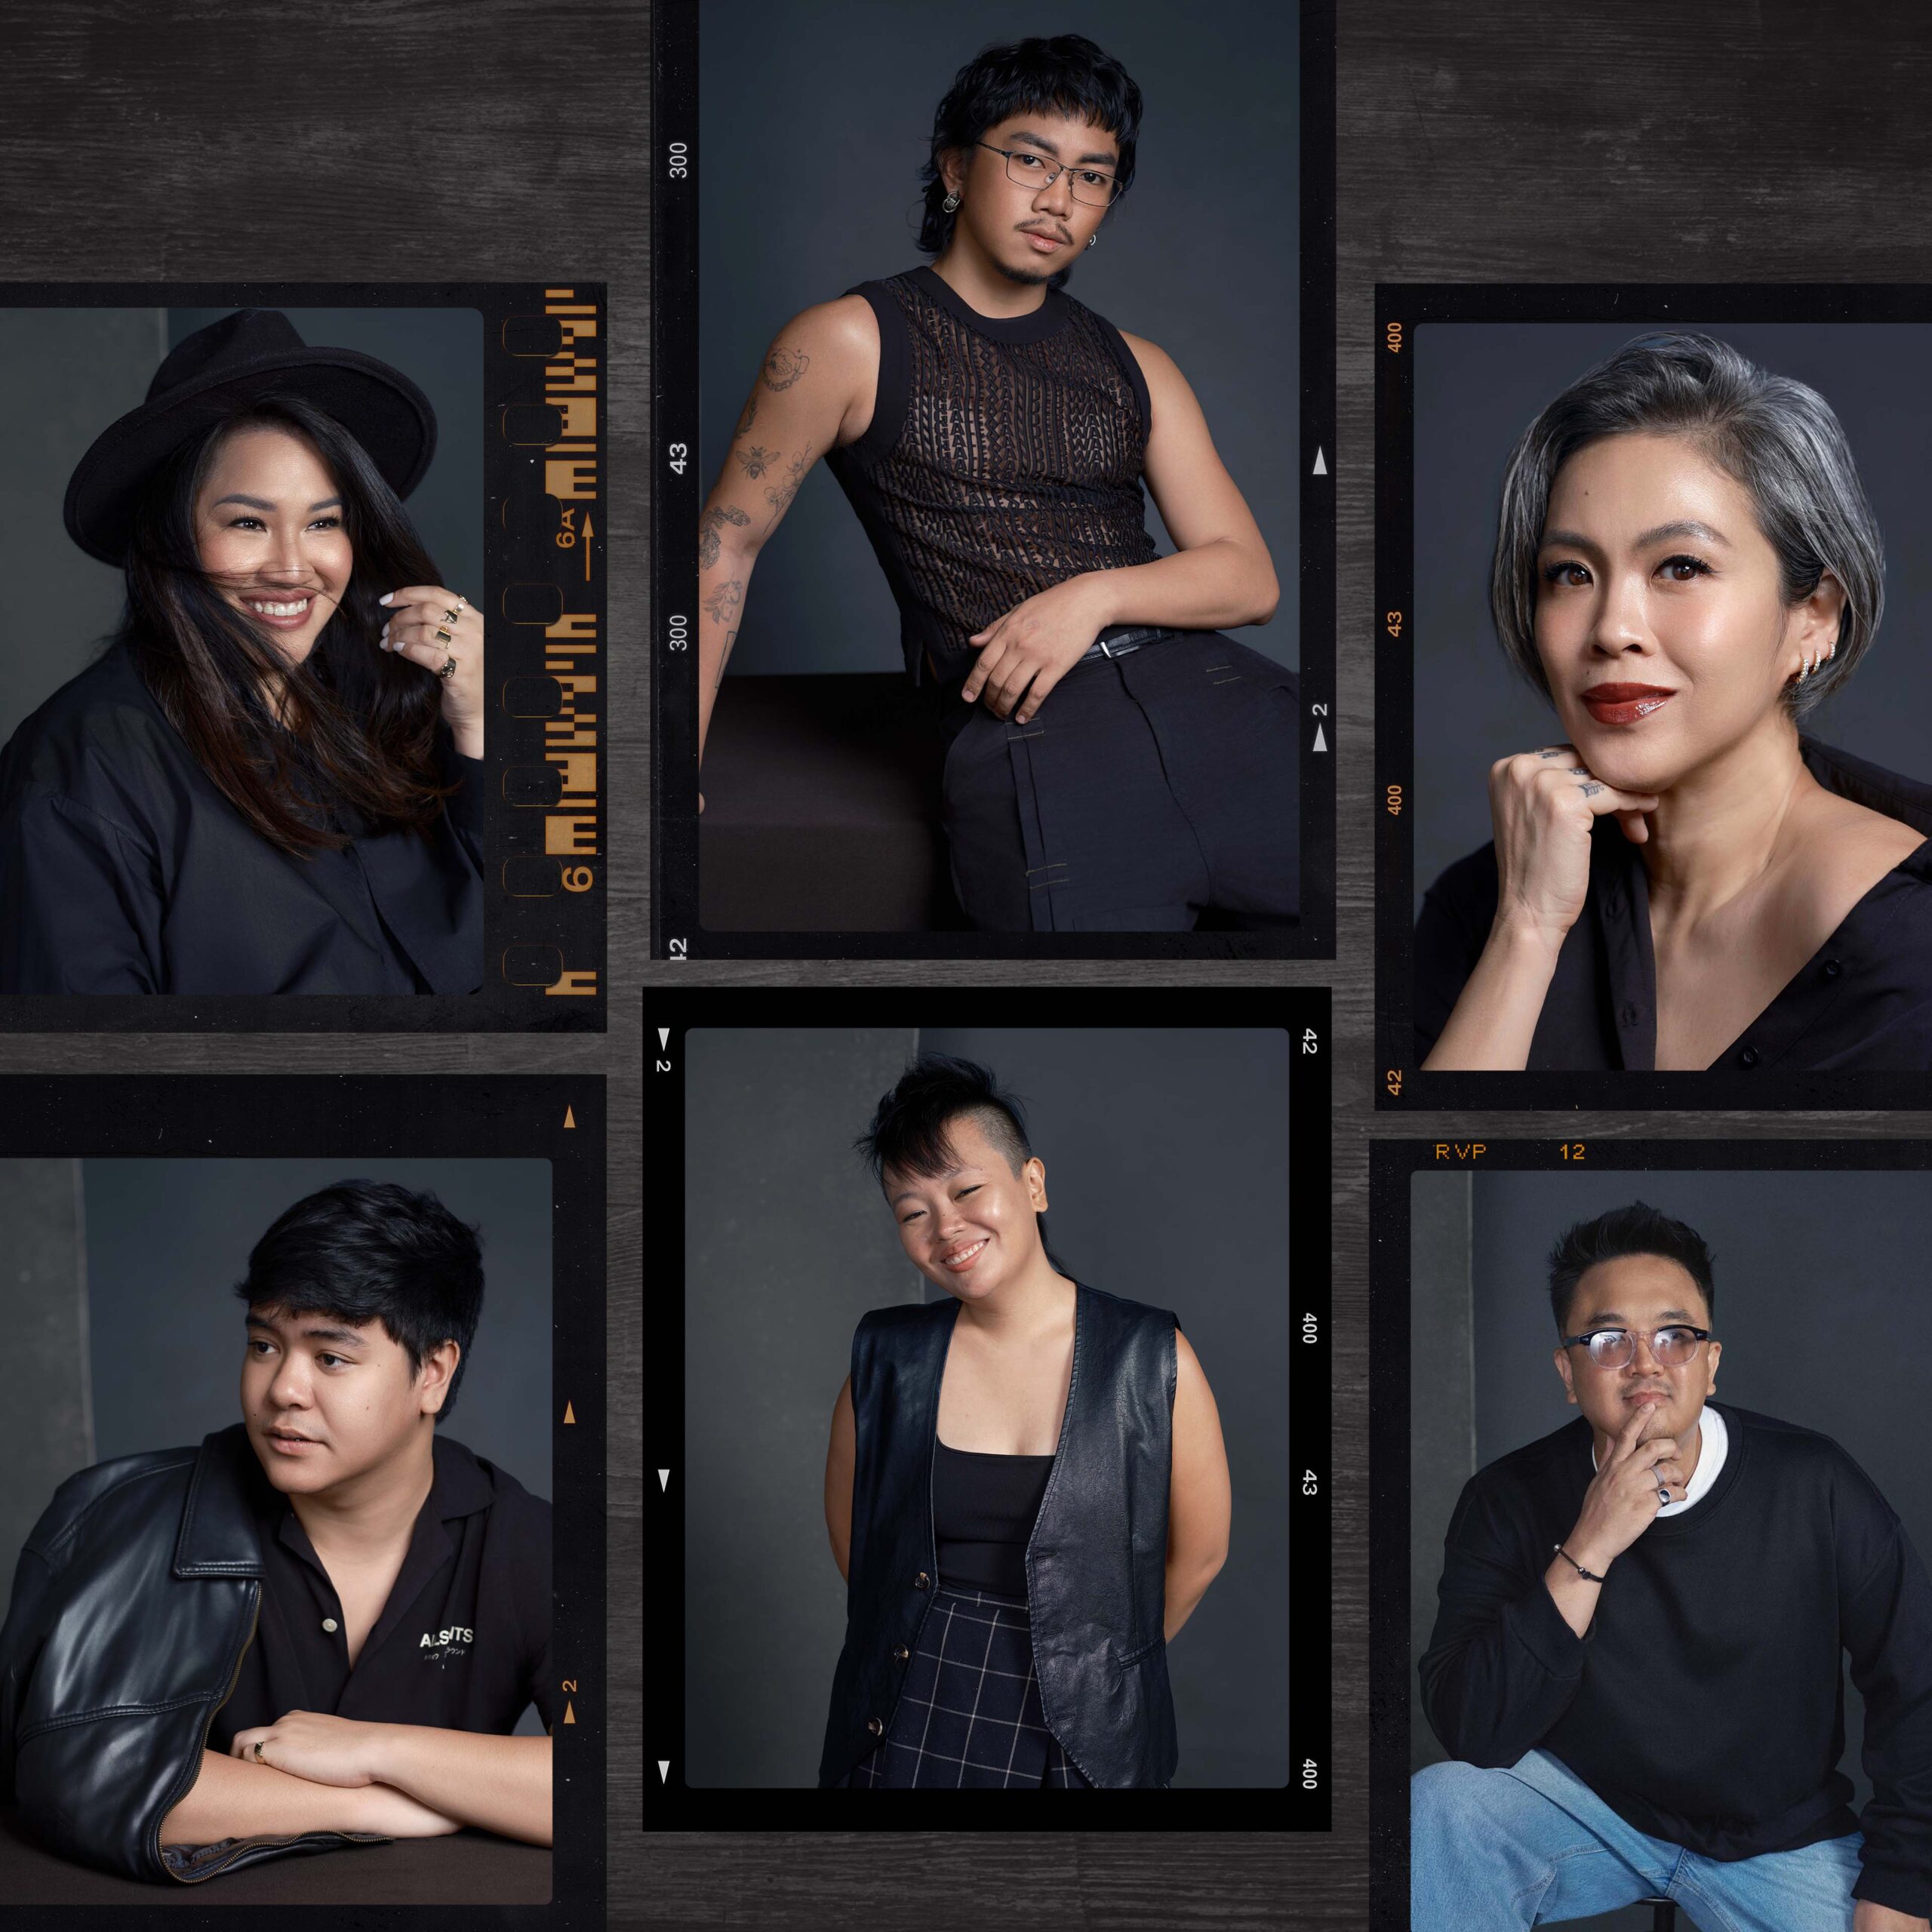 The Importance of Collaboration in the Industry, According to Filipino Creatives